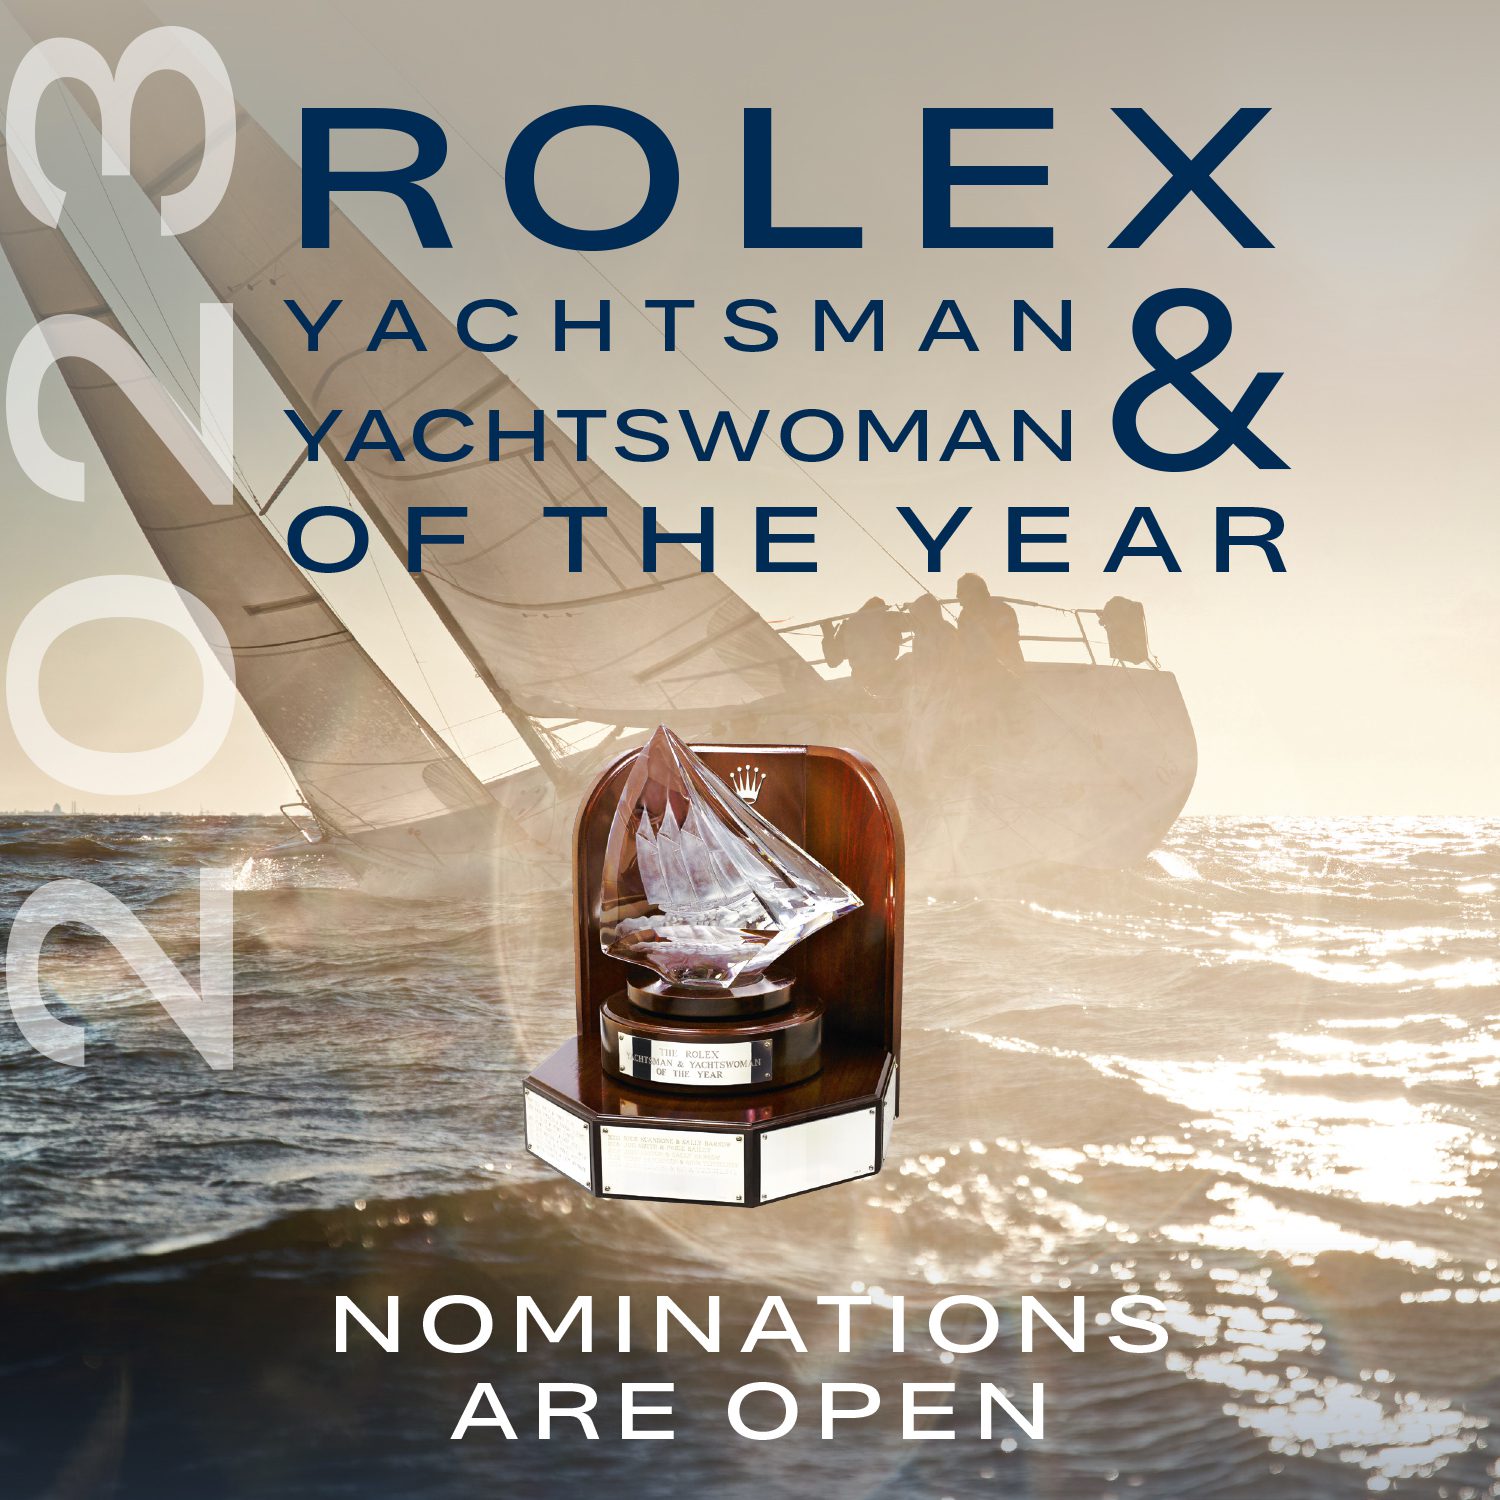 us sailing rolex yachtsman of the year